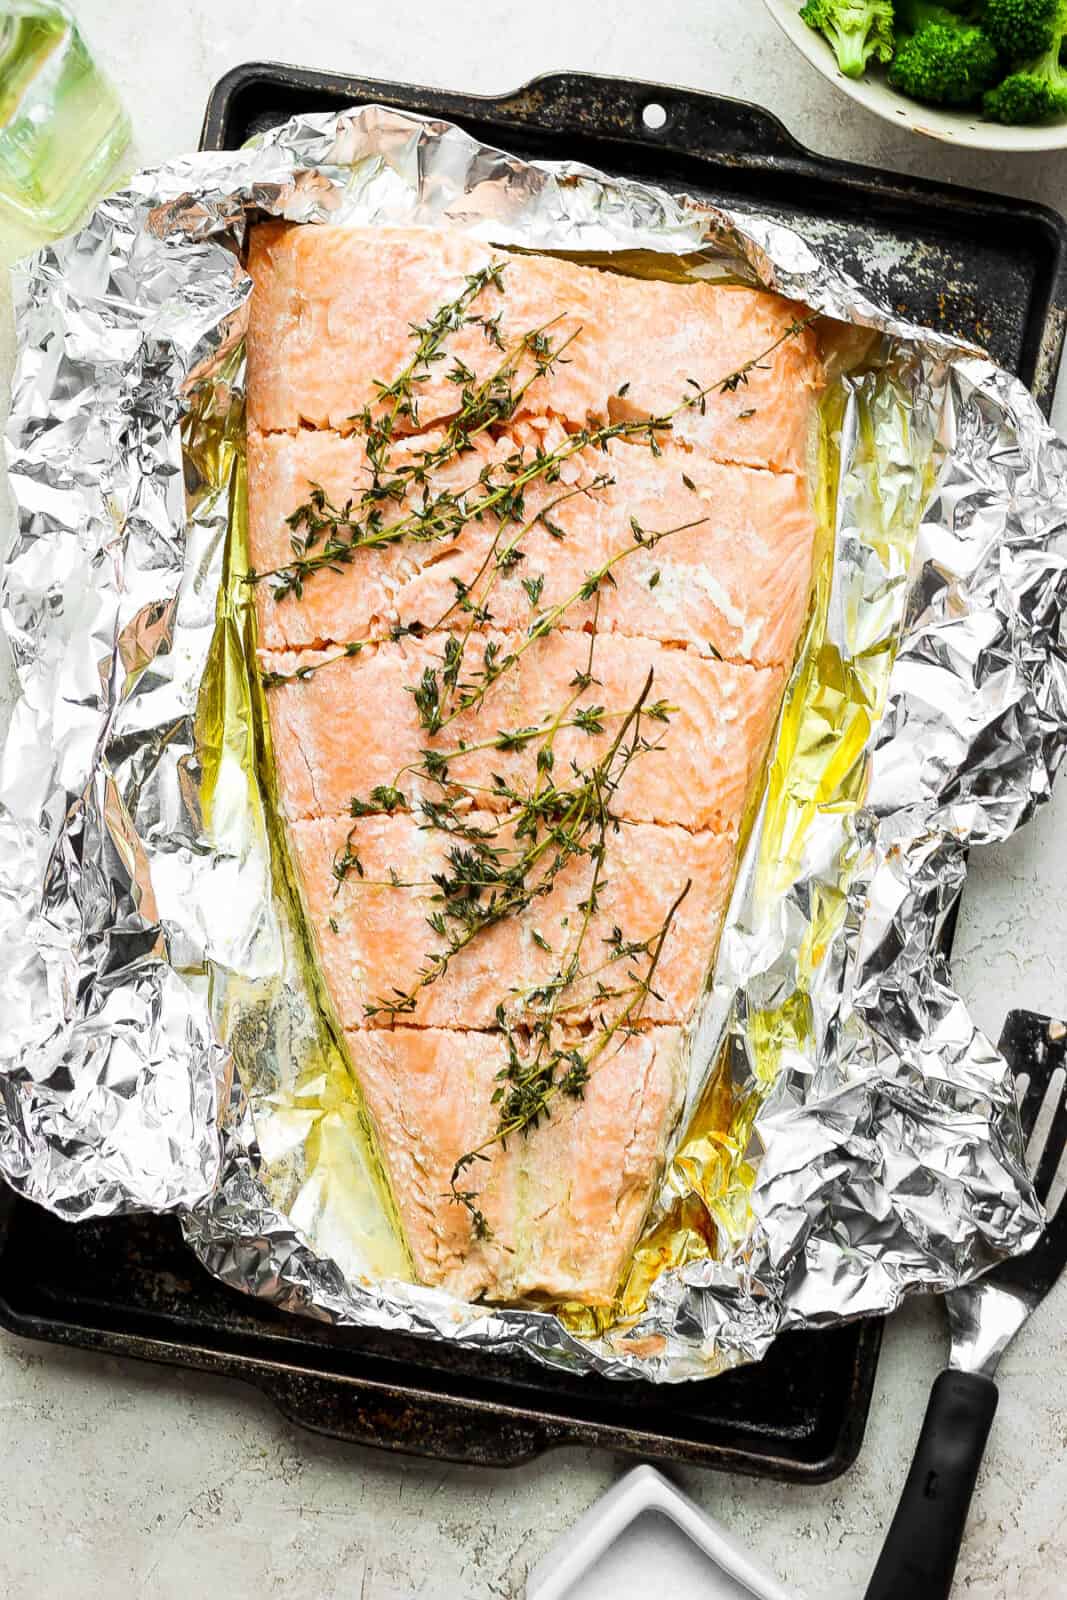 A large baked salmon fillet in foil on a baking sheet.